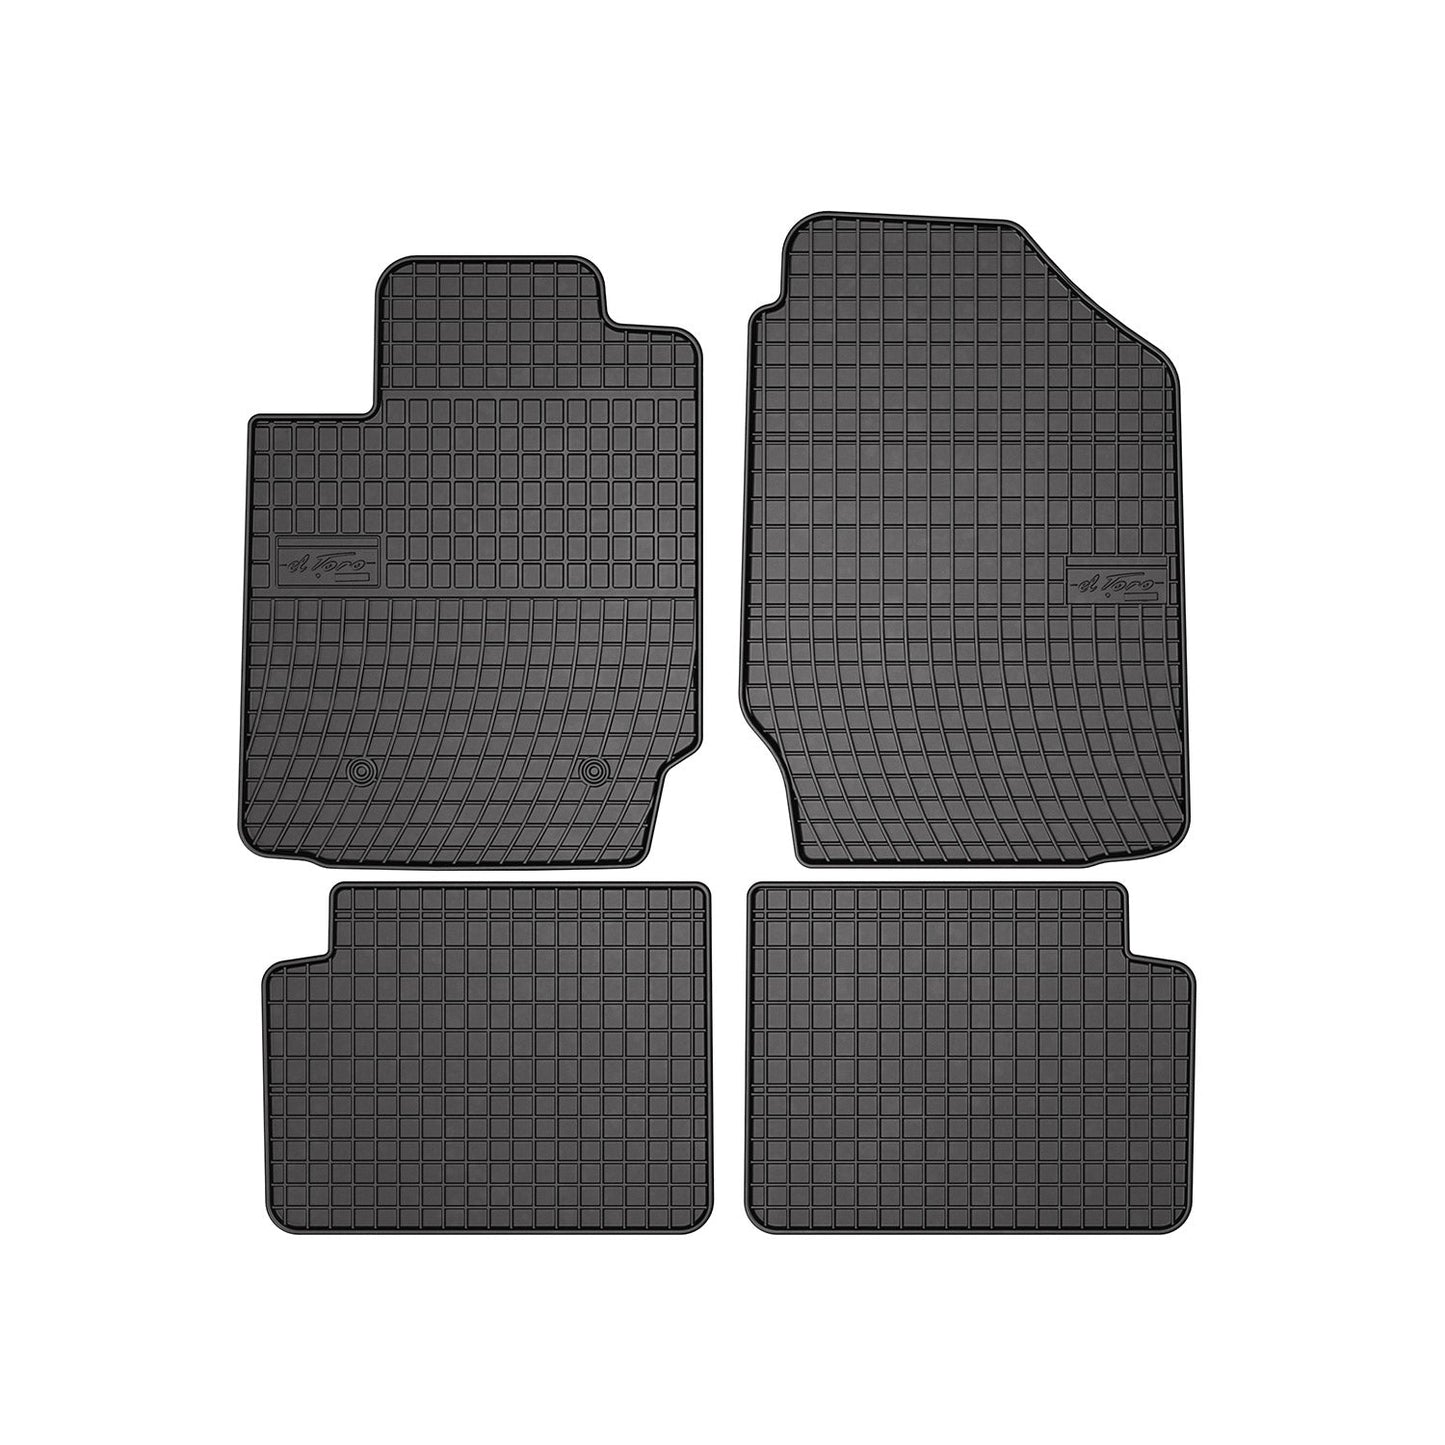 OMAC OMAC Floor Mats Liner for Toyota Corolla 2003-2008 Black Rubber All-Weather 4Pcs '7001484